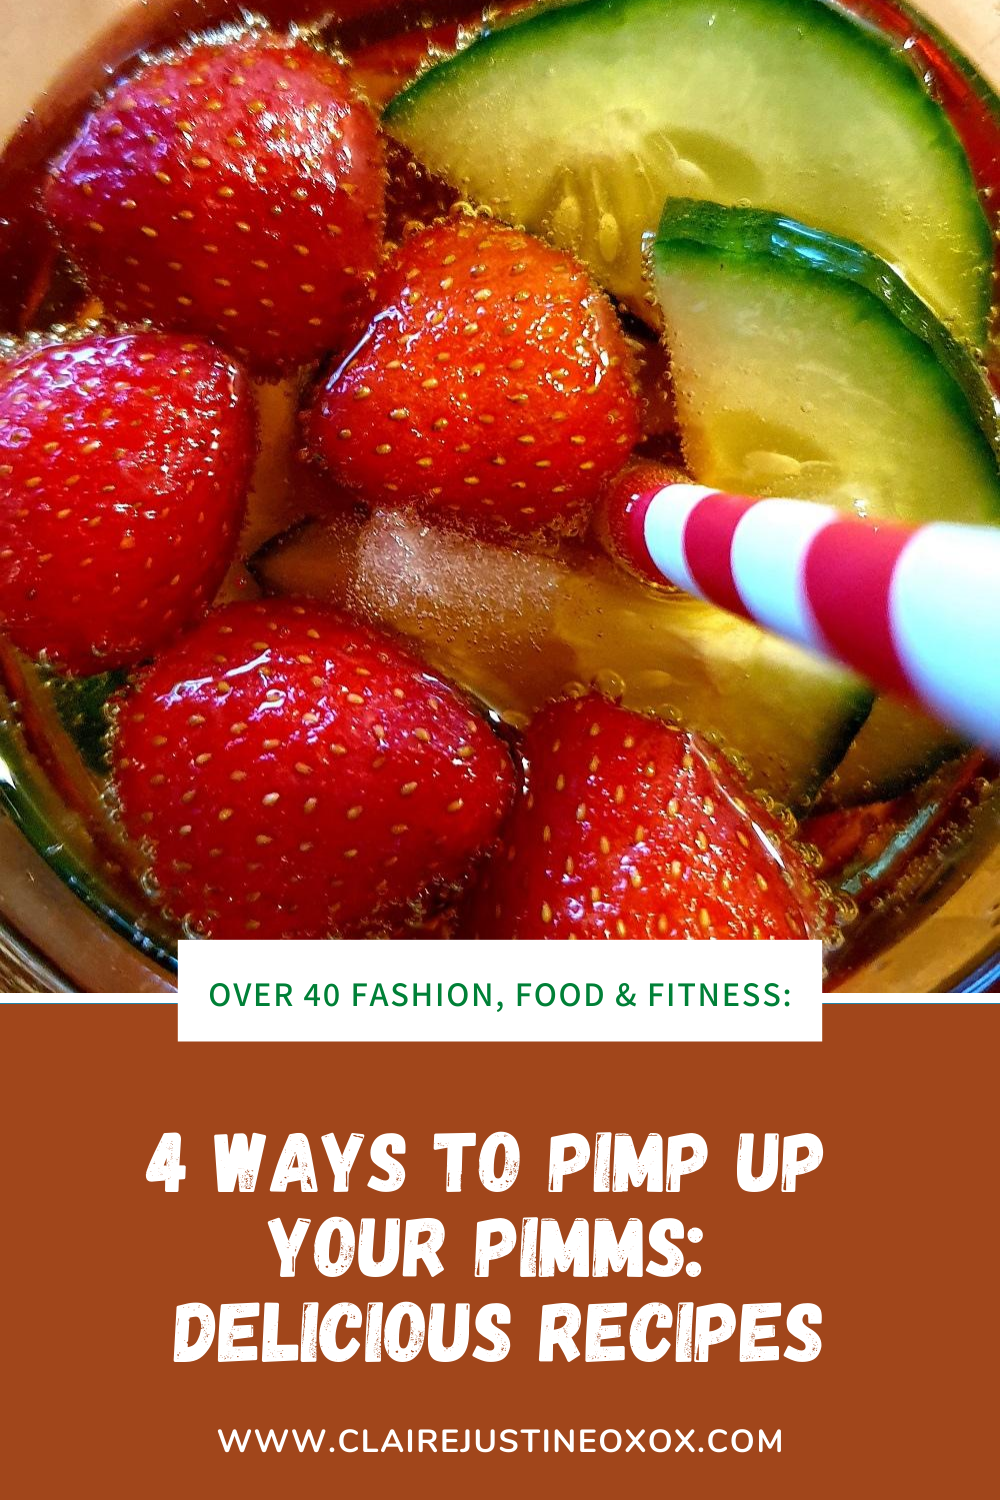 4 Ways To Pimp Up Your Pimms: Delicious Recipes